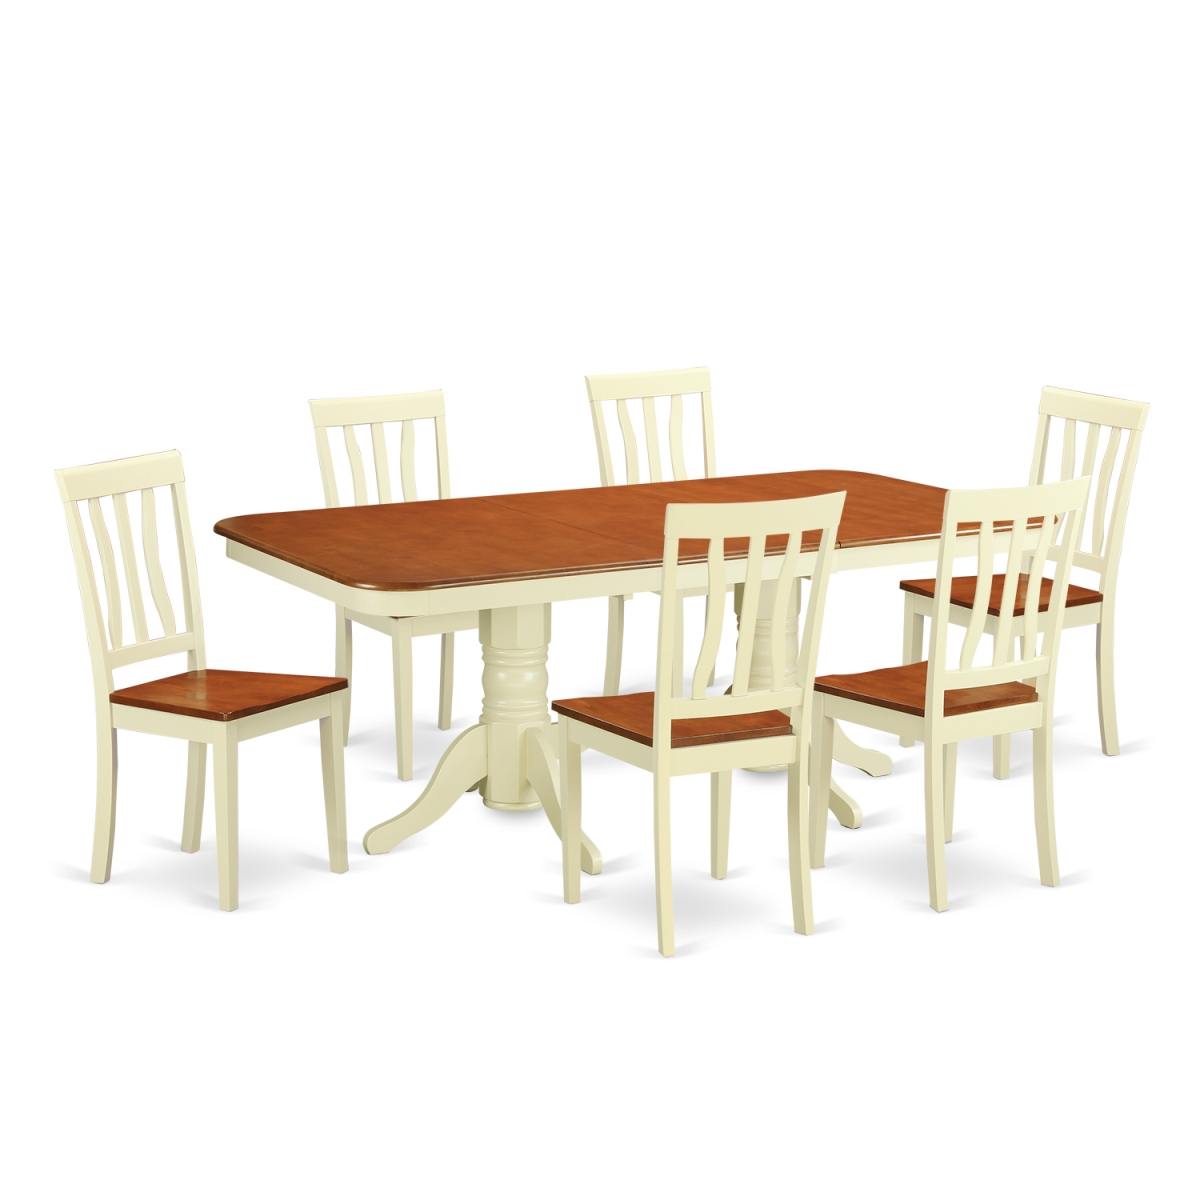 NAAN7-WHI-W Dining Room Set - Kitchen Table & 6 Chairs, Buttermilk & Cherry - 7 Piece -  East West Furniture